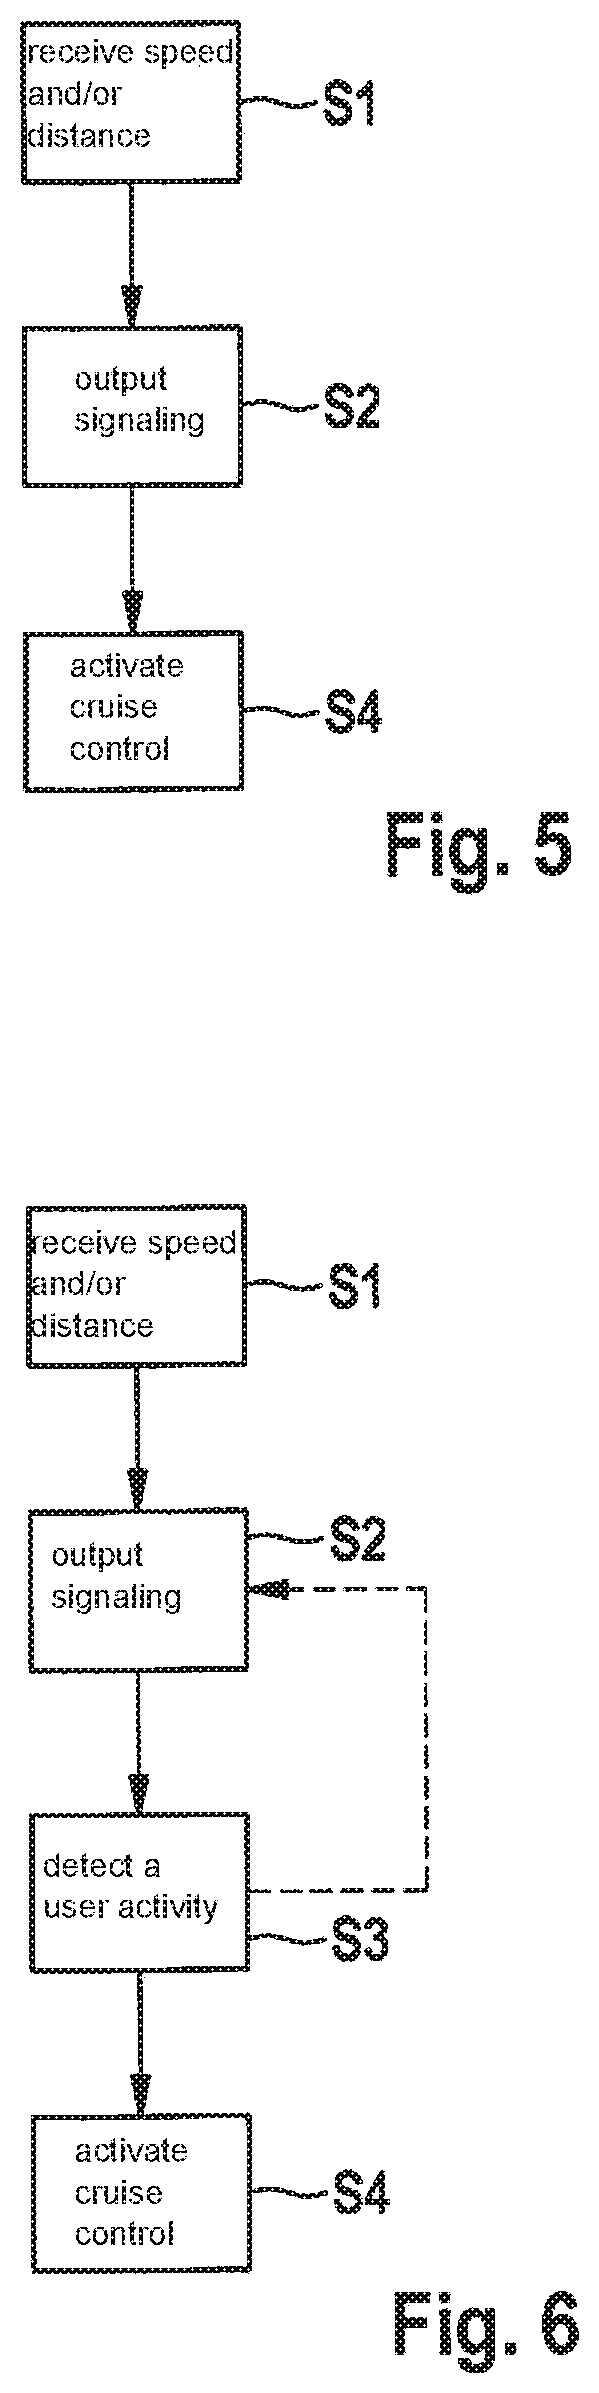 Method and apparatus for controlling cruise control